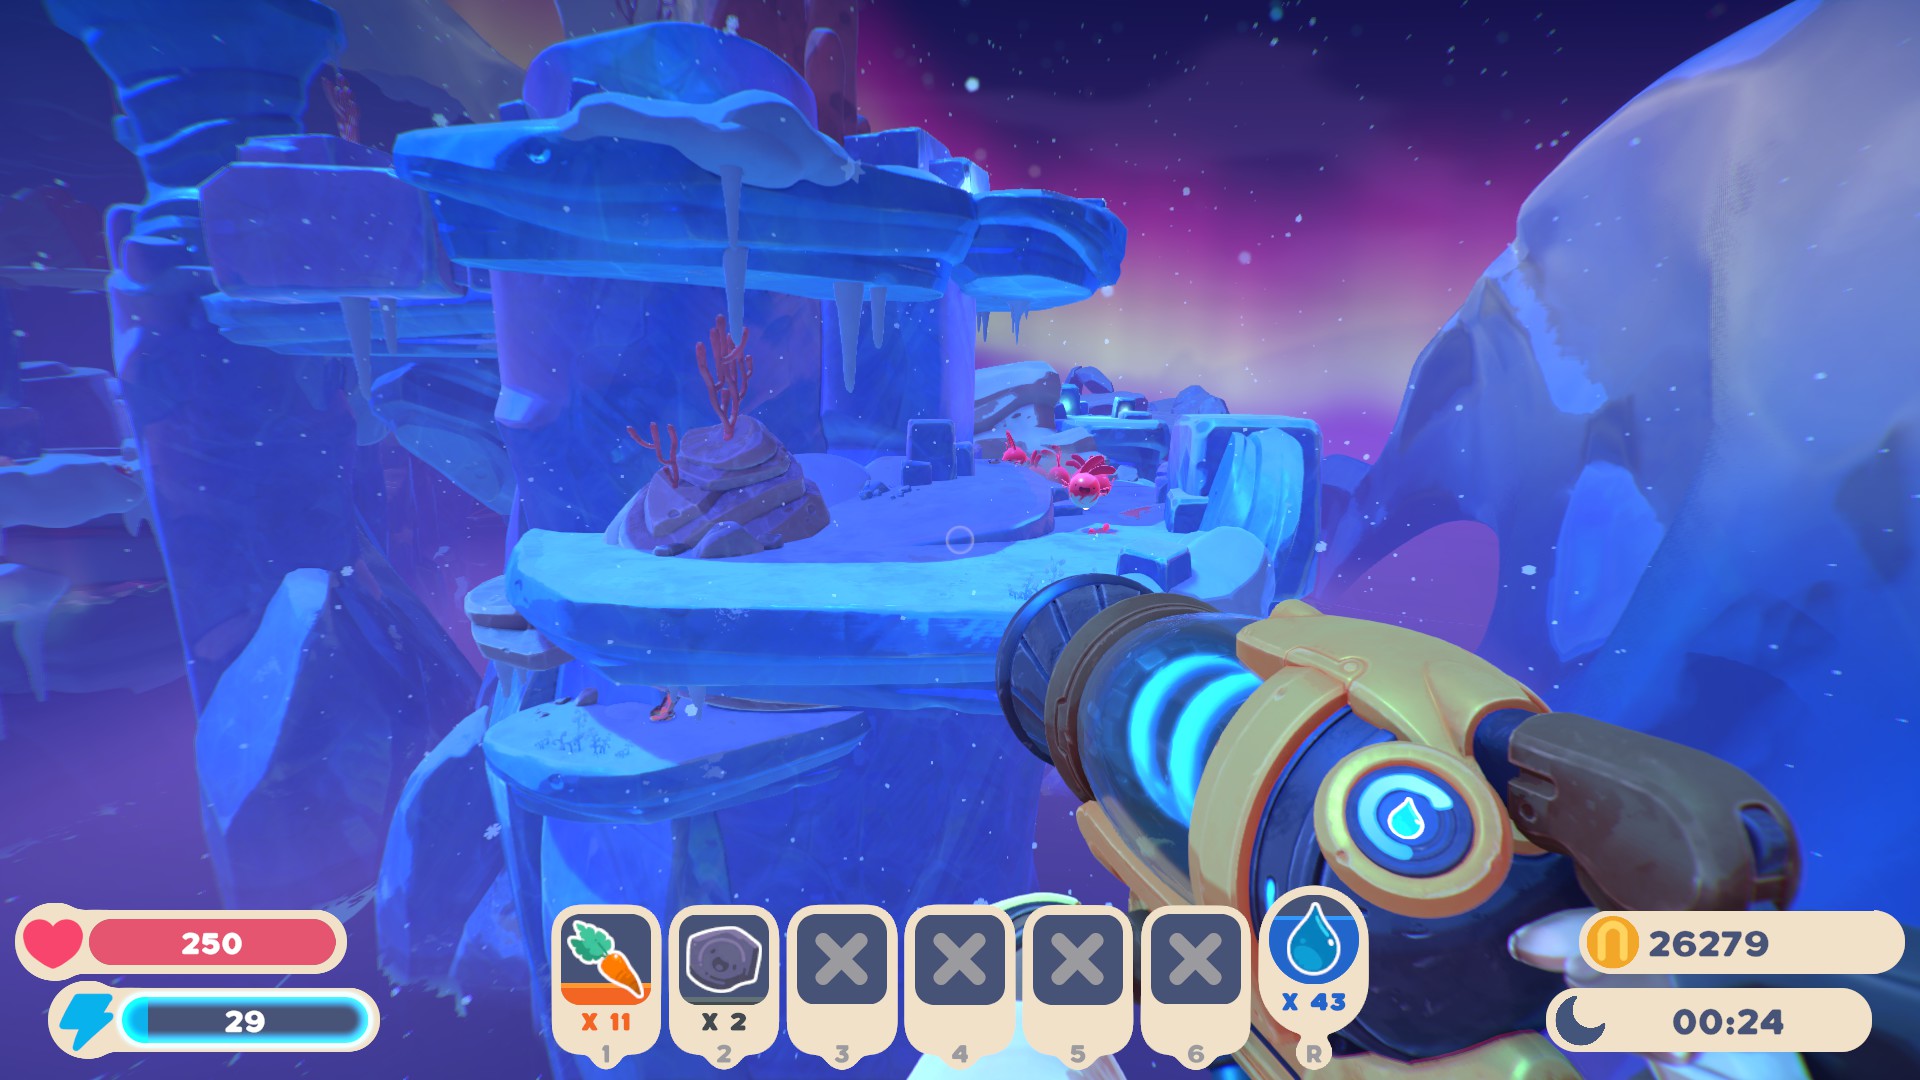 Slime Rancher 2 - Capsule Locations for Powderfall Bluffs - Pods 13 - 20 (Exterior II) - 3F0EF27